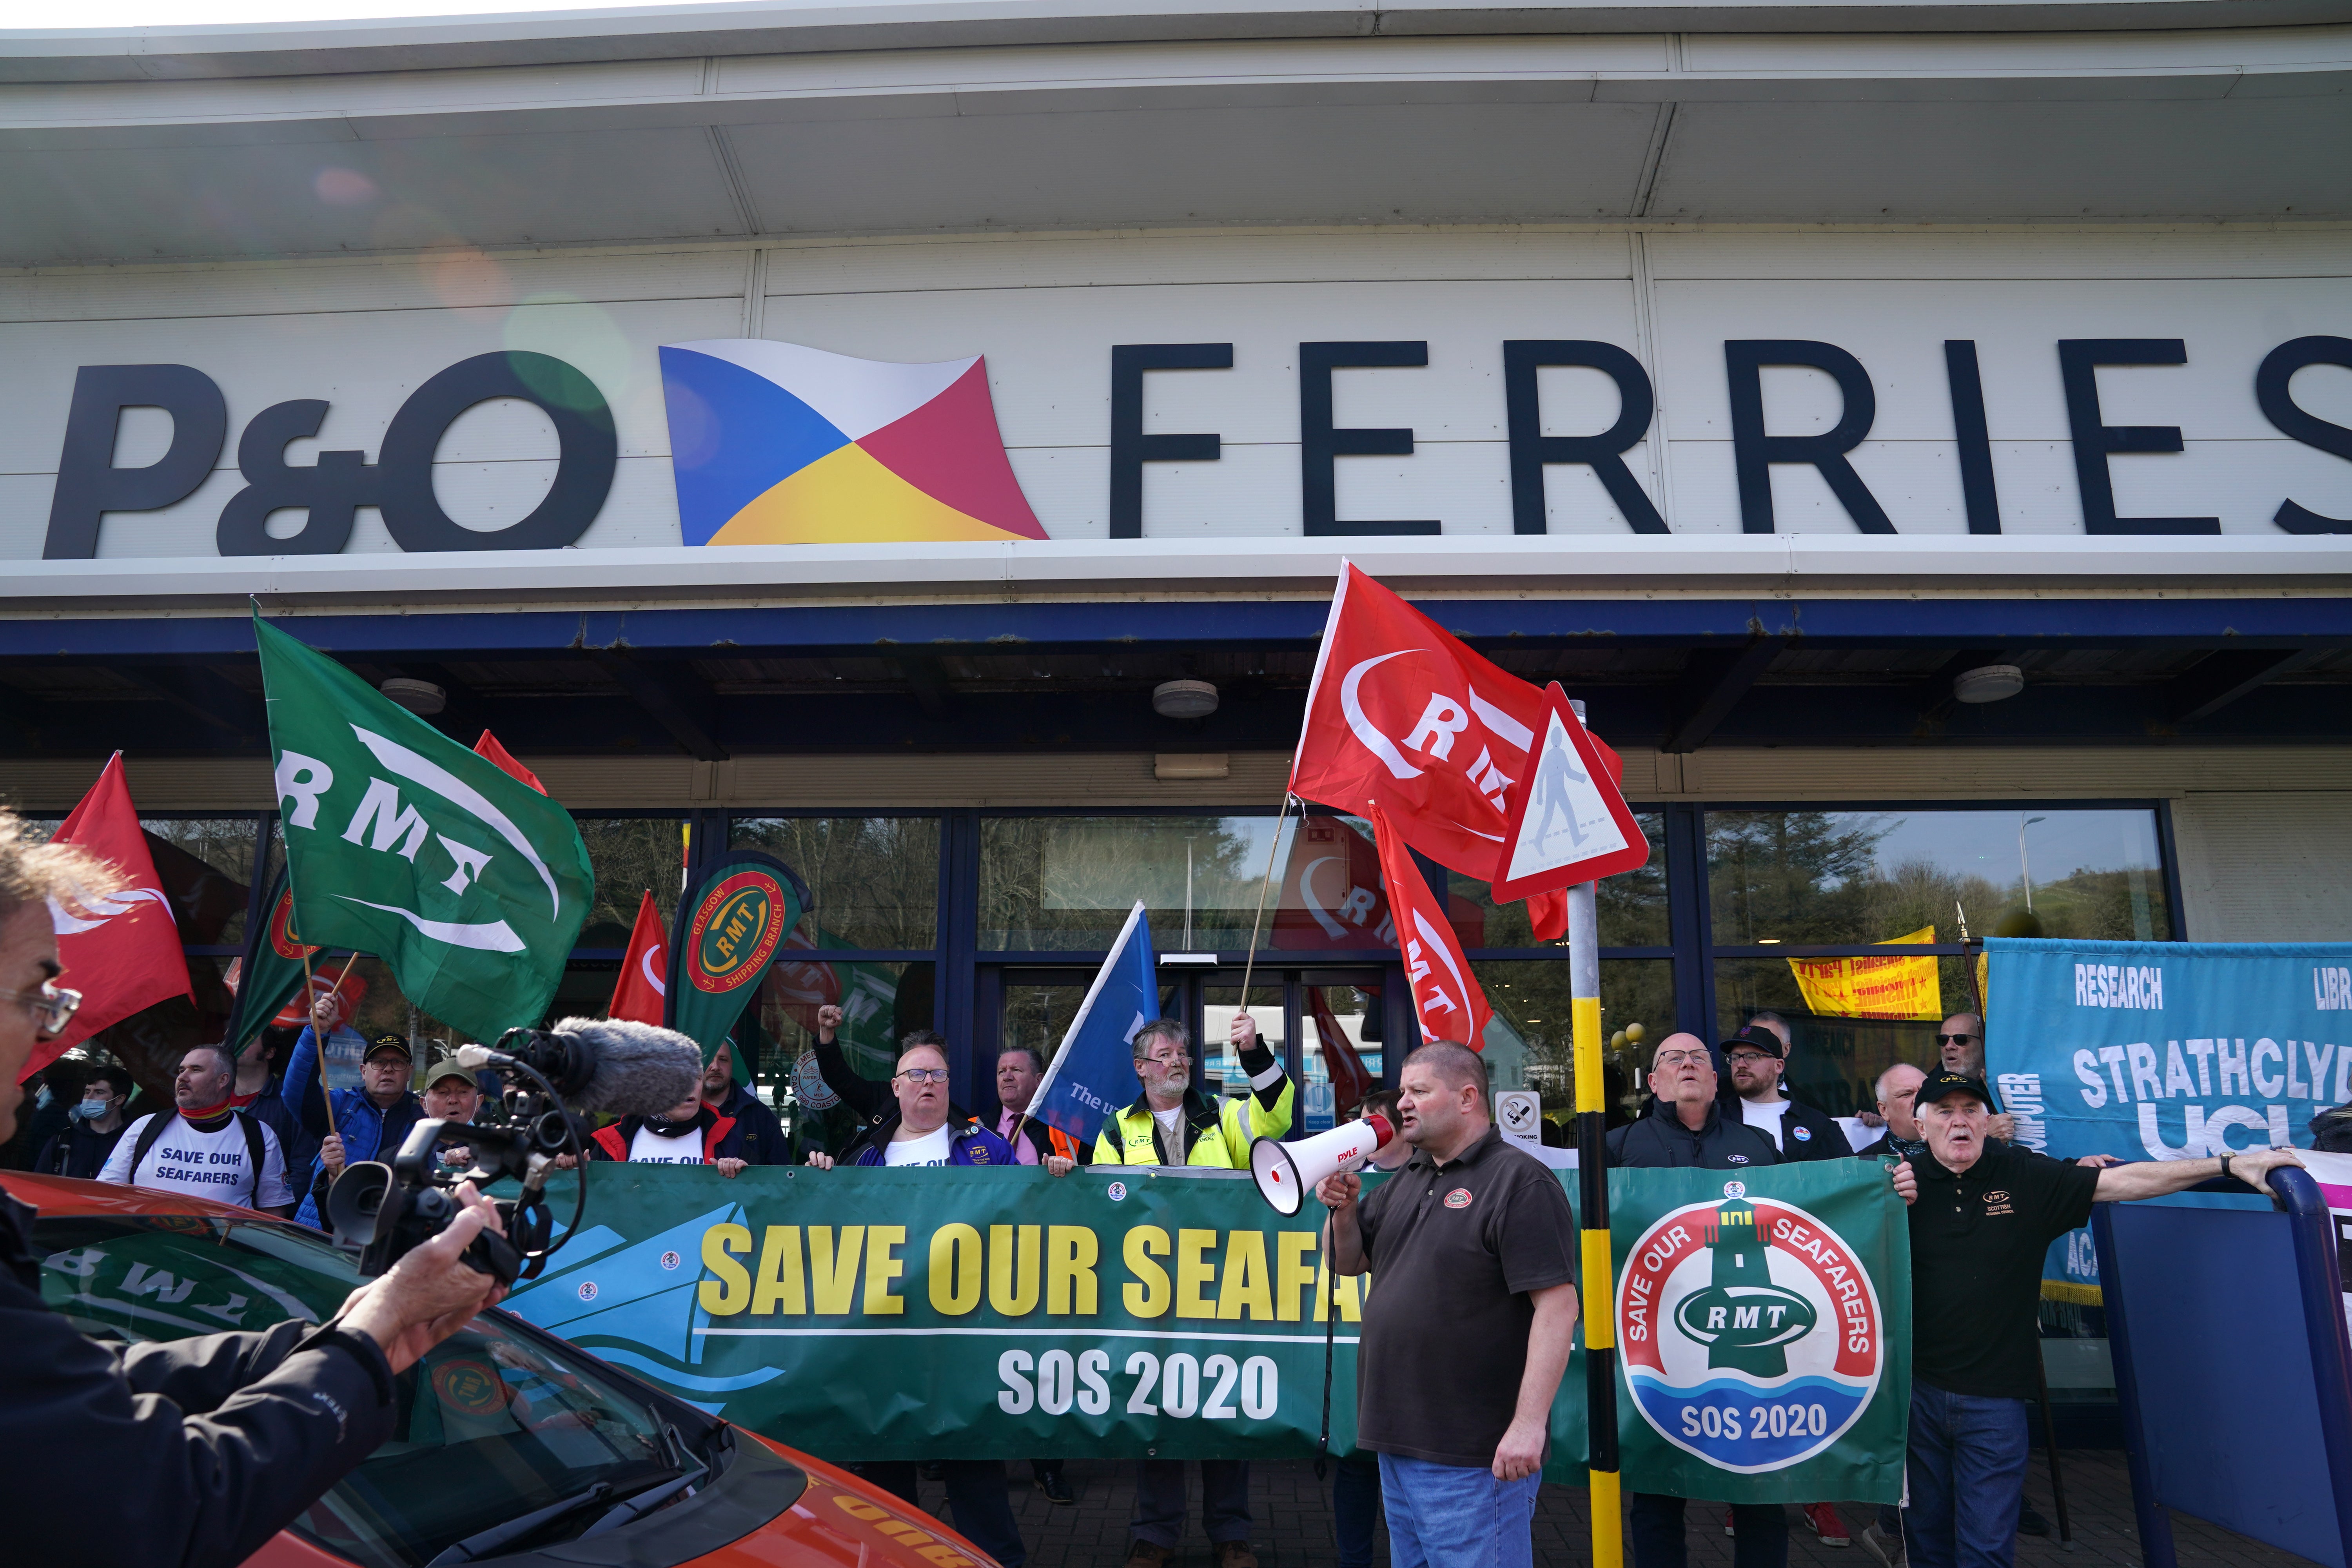 A demonstration against the dismissal of P&O workers